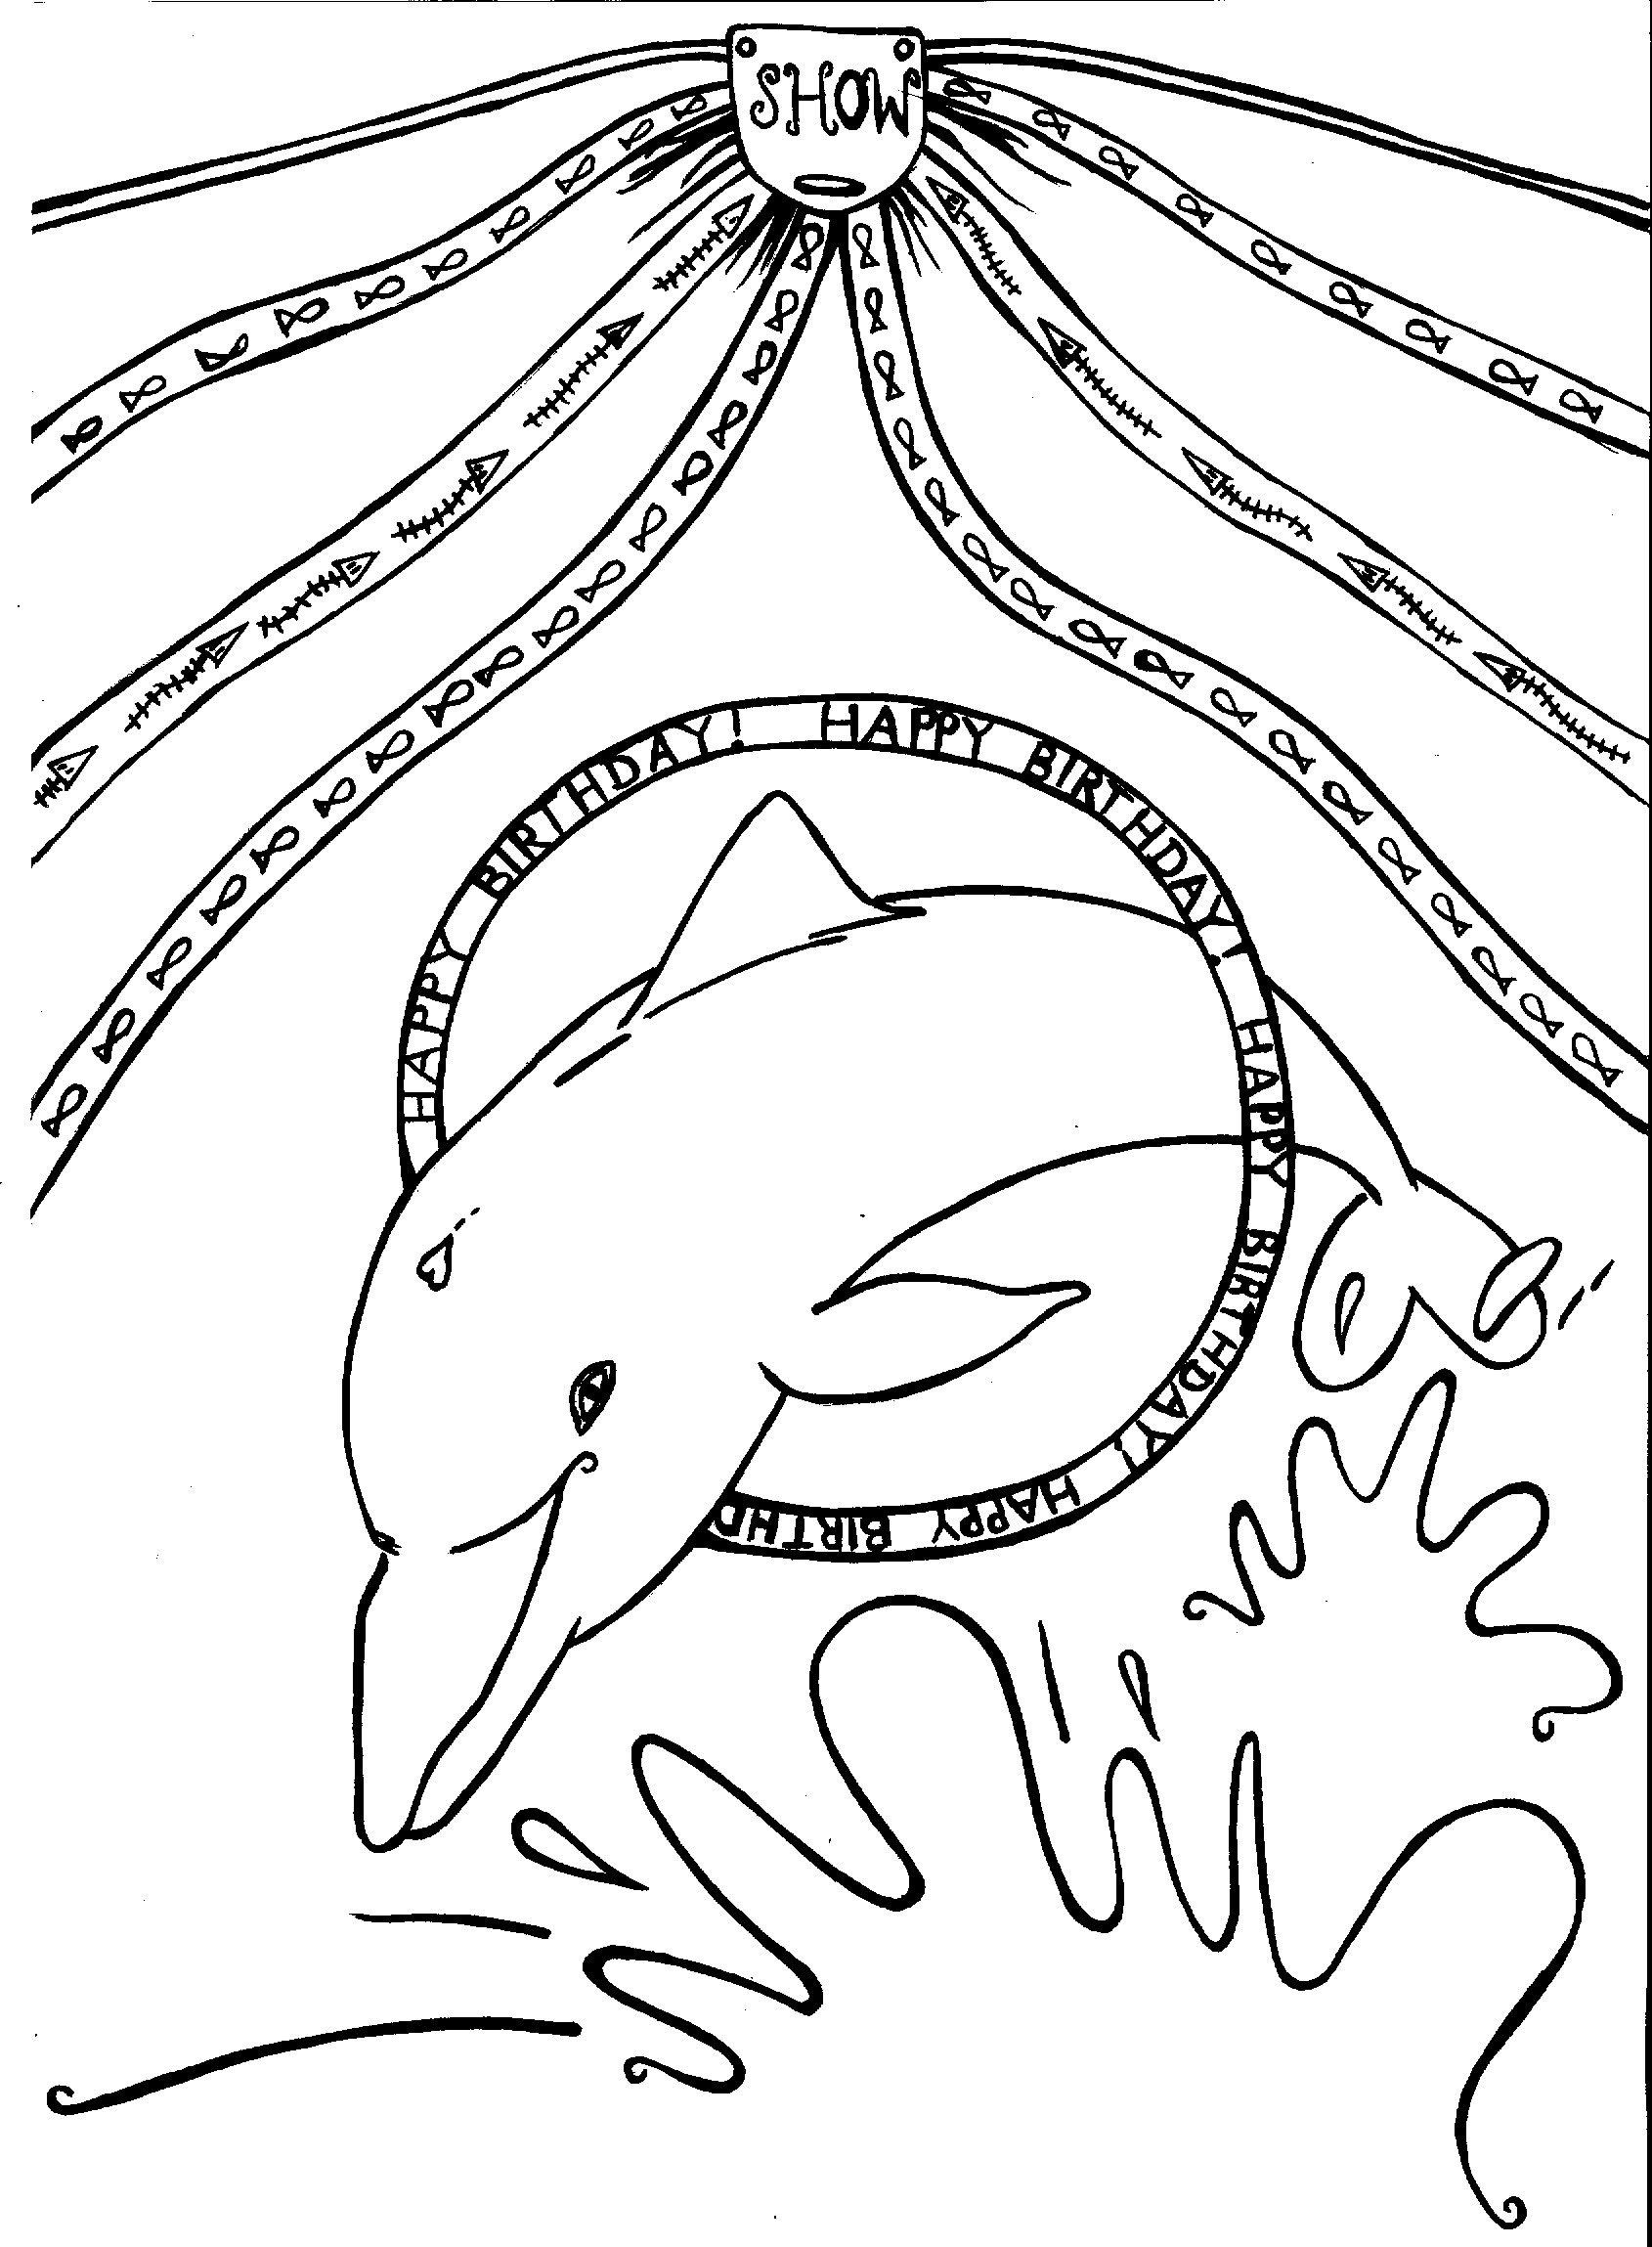 Sea Animals Worksheets for Kids